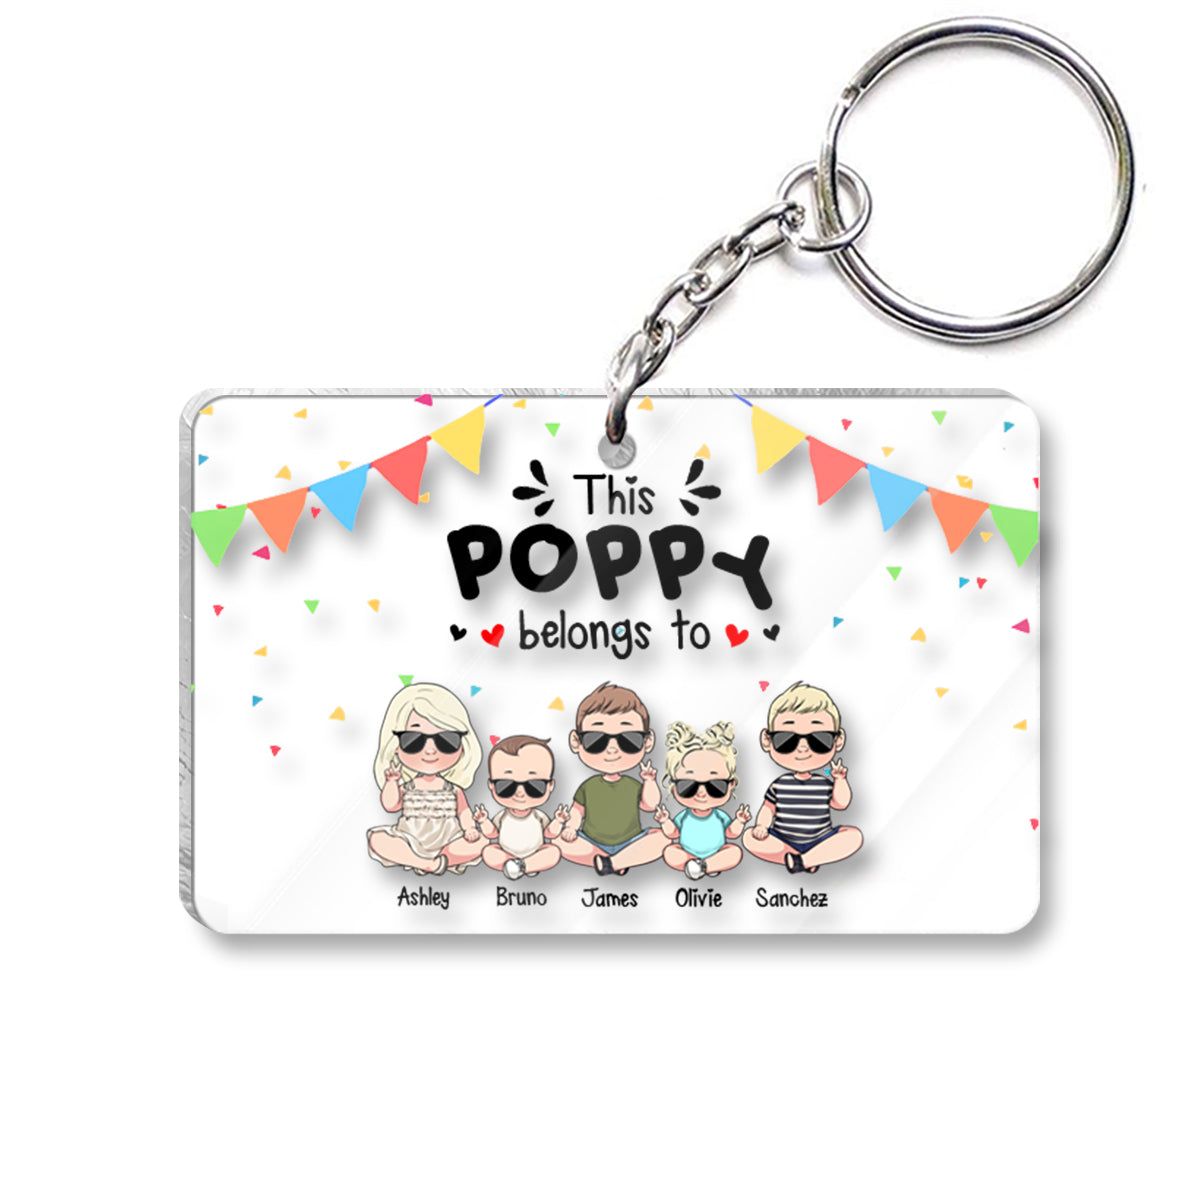 My Favorite People - Gift for grandpa, grandma, brother, sister, mom, dad, uncle, aunt - Personalized Keychain